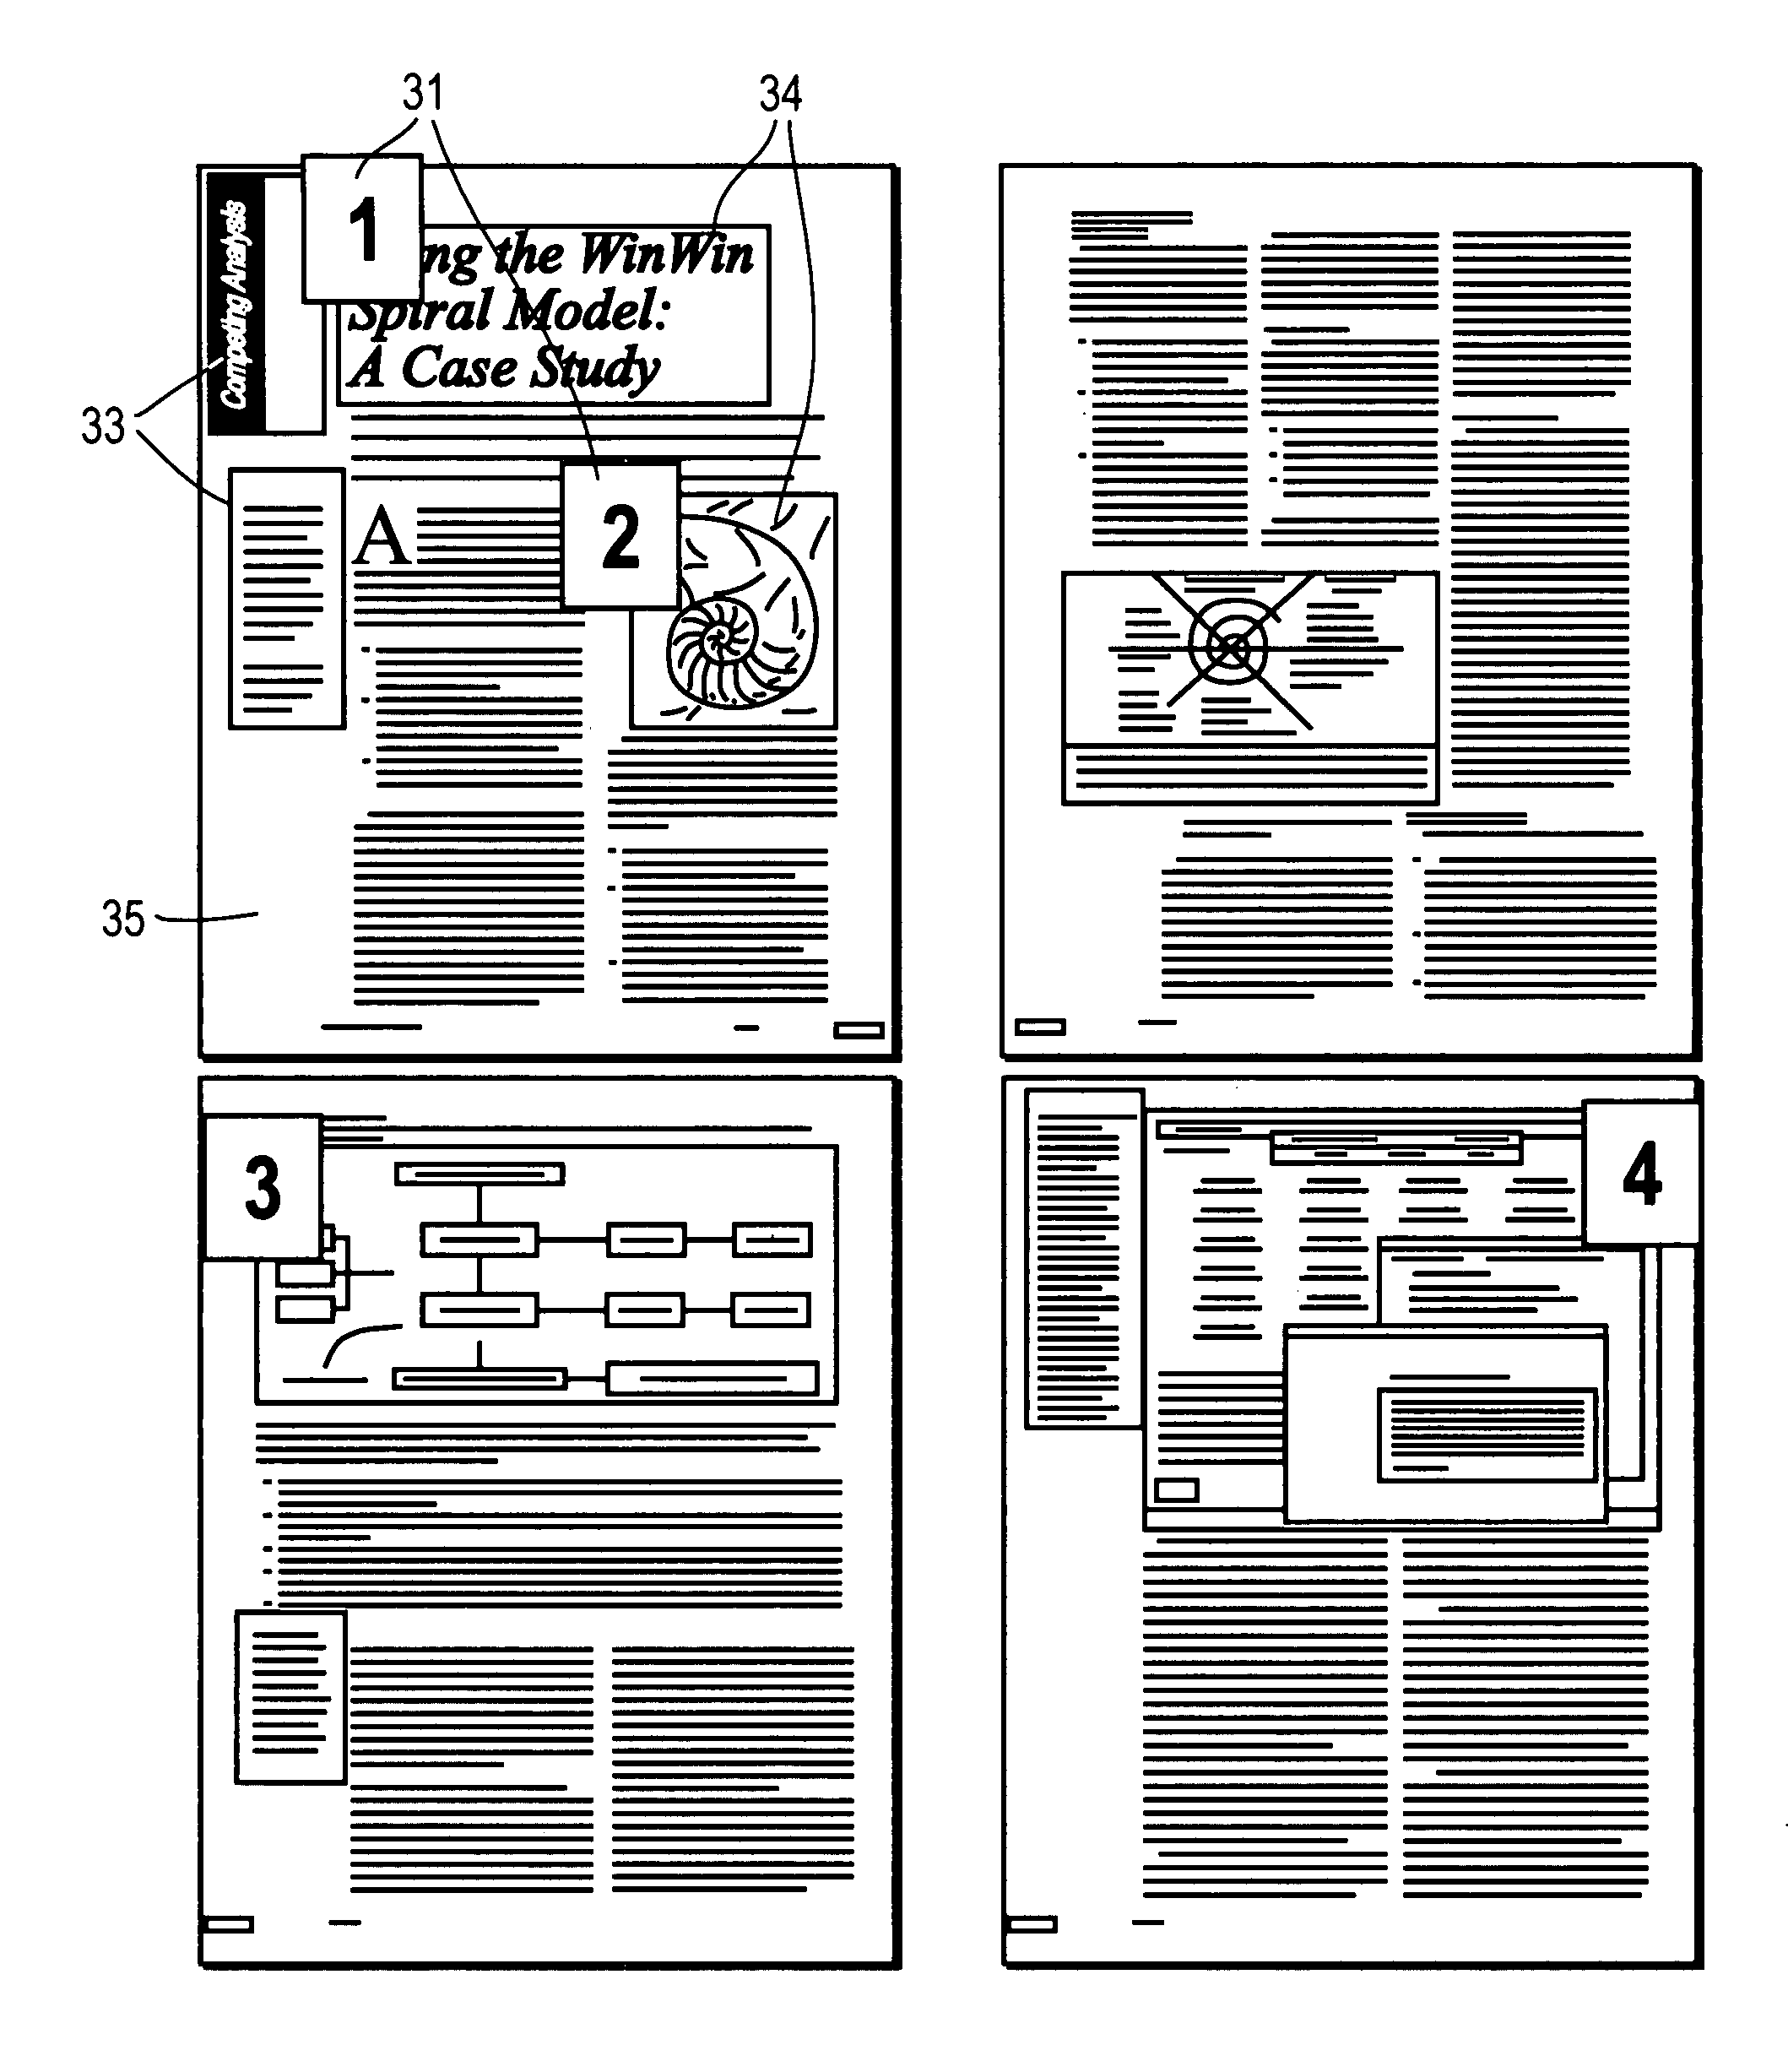 Methods for authoring and interacting with multimedia representations of documents